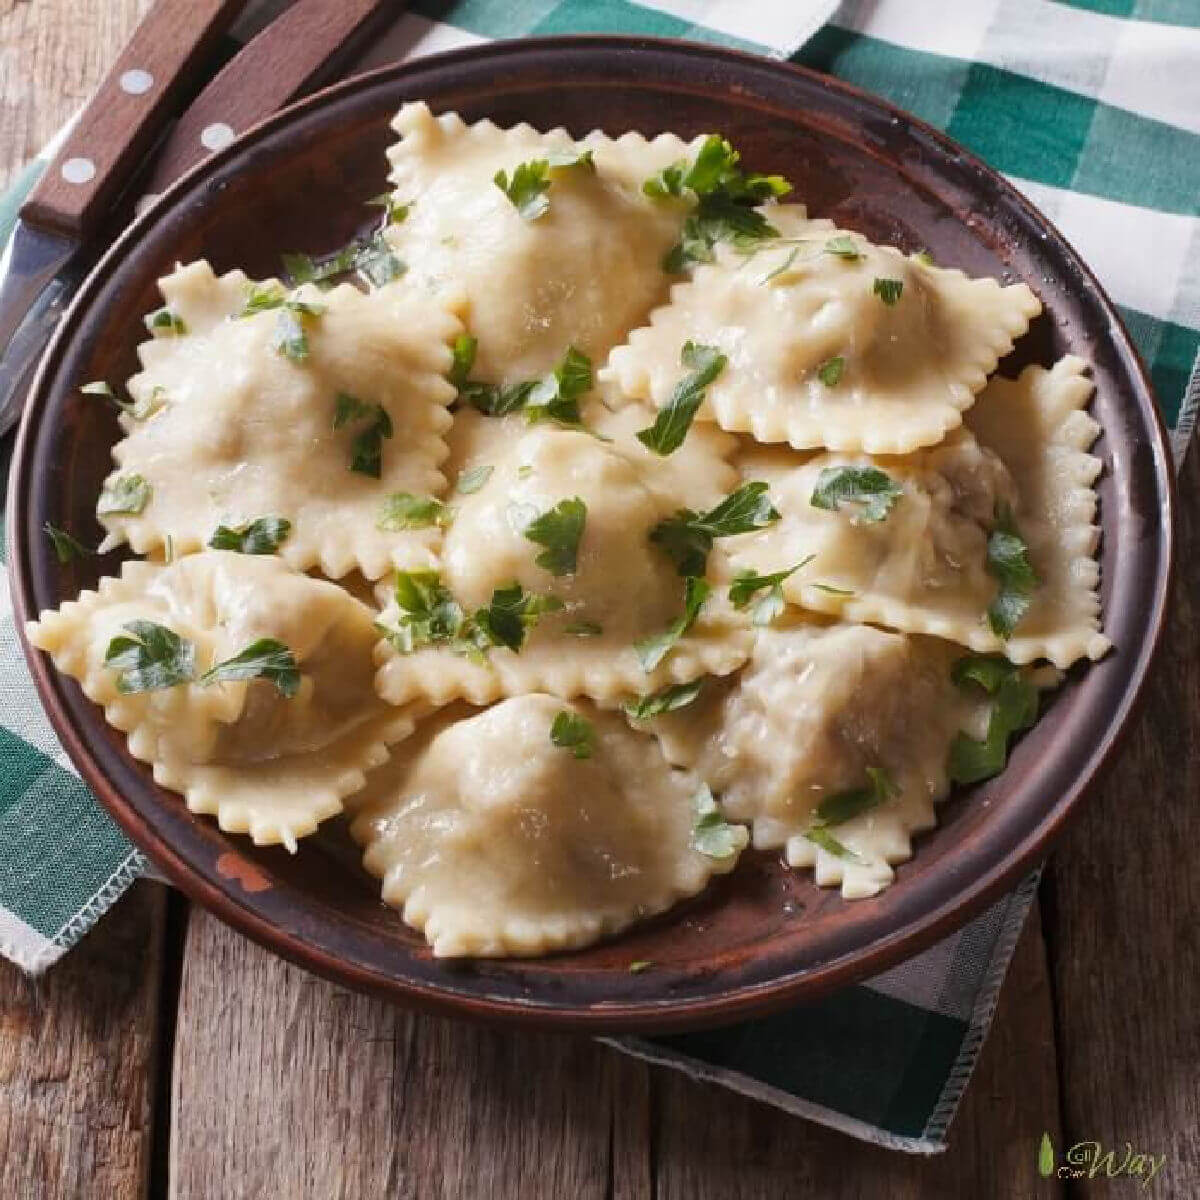 Italian Ravioli with Meat & Cheese Filling - All Our Way